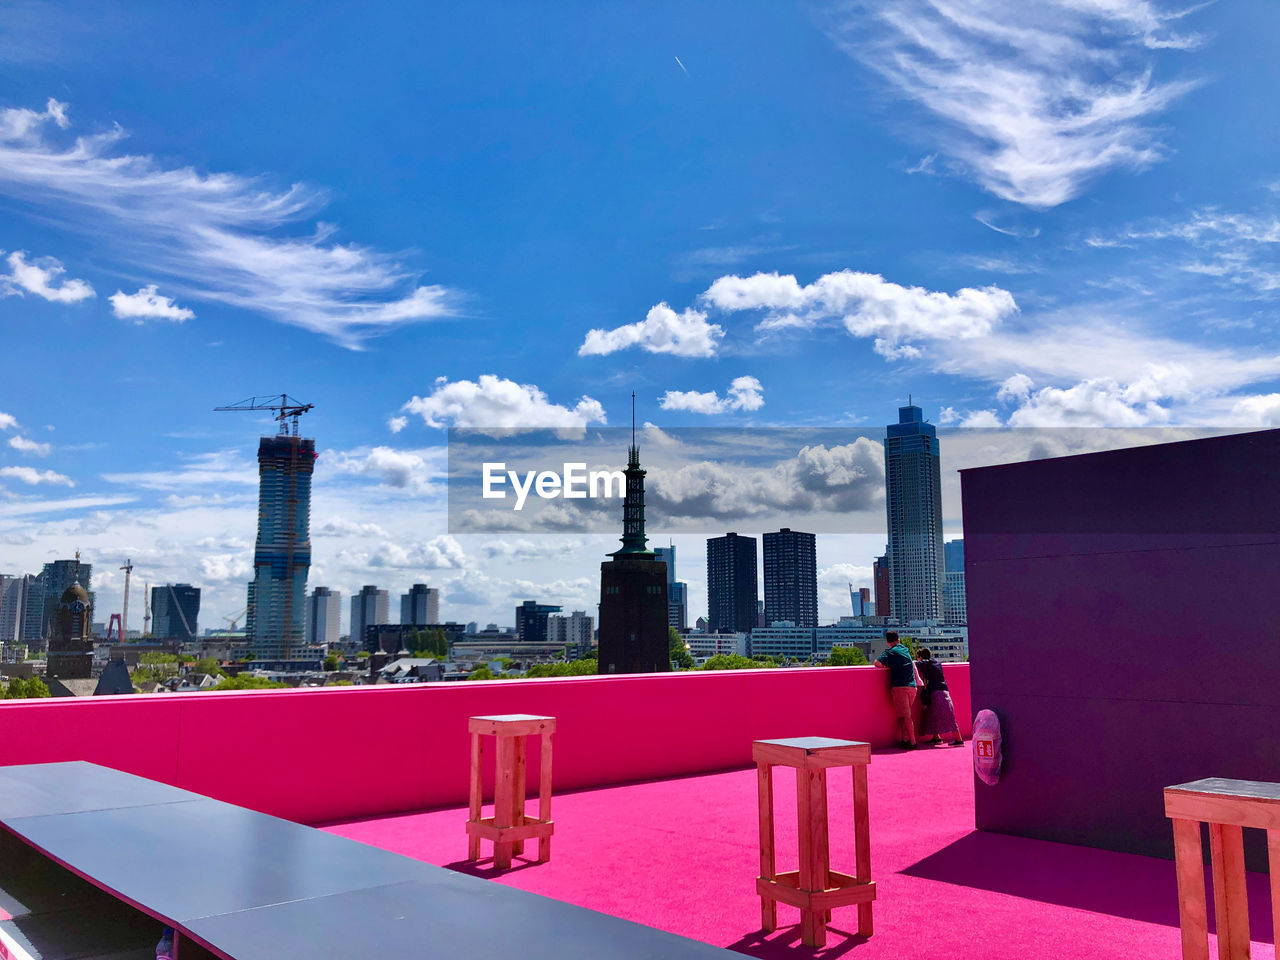 View at city center from a very pink platform on a roof under blue sky with white clouds